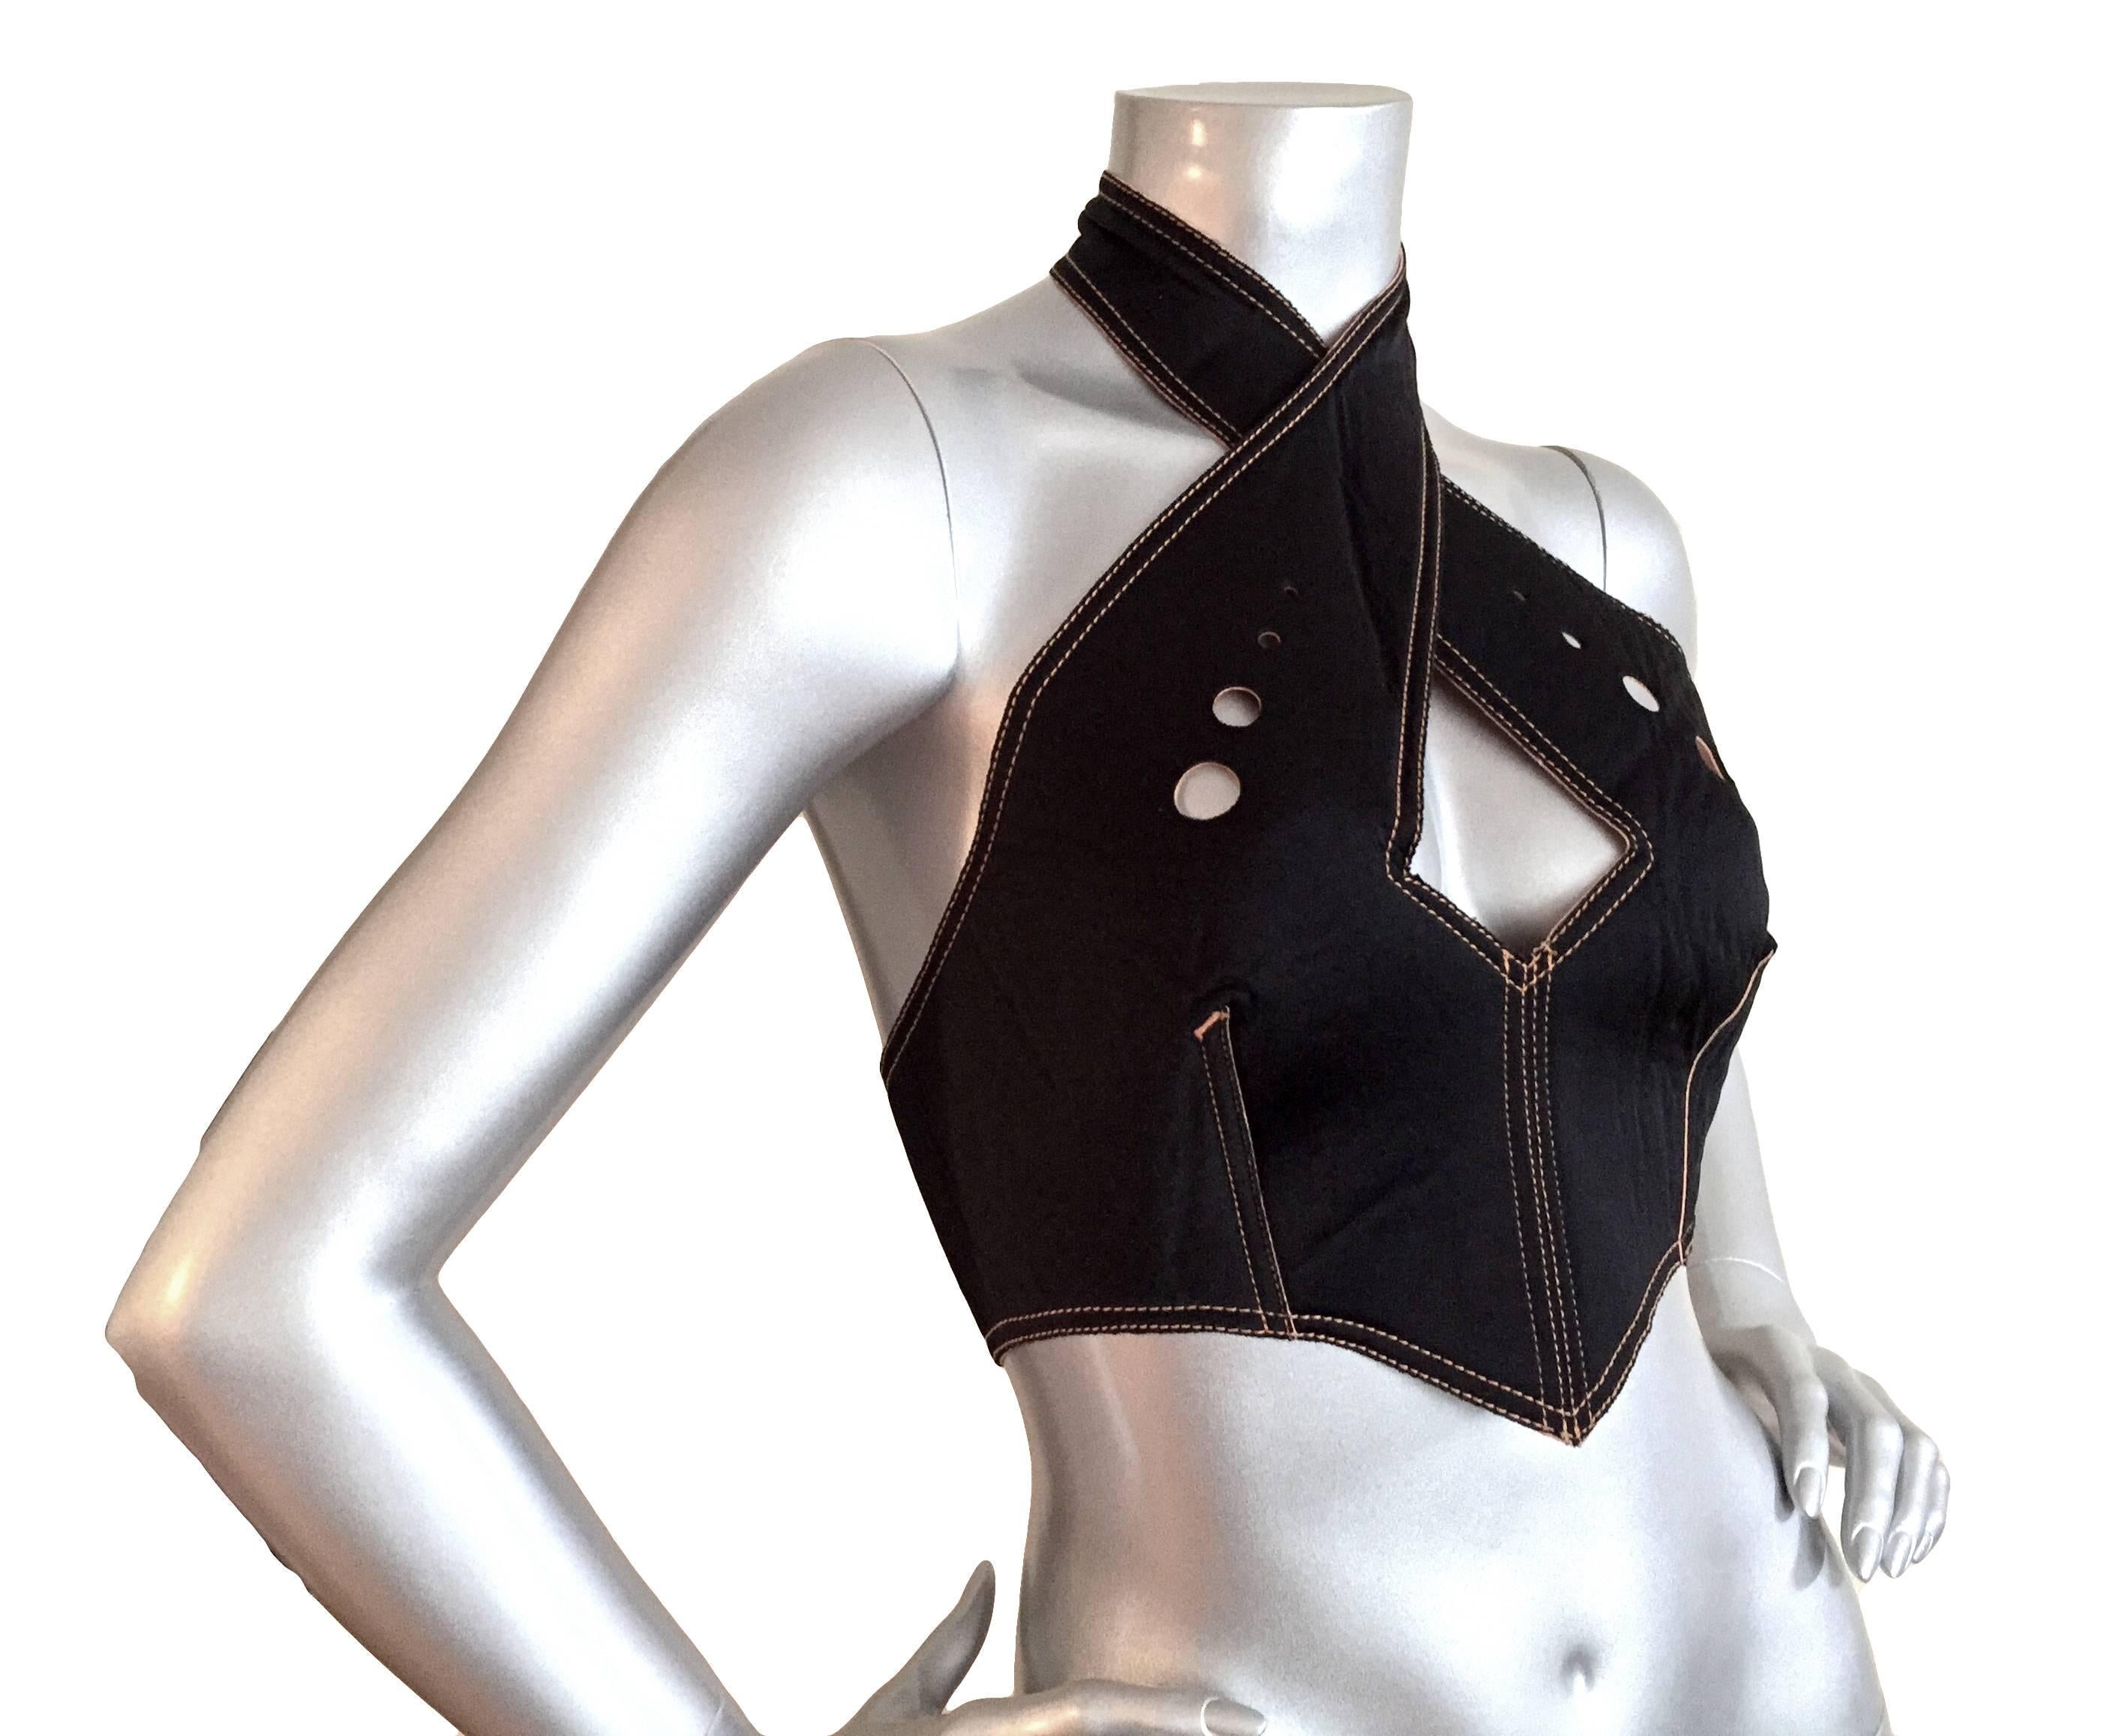 Knockout Jean Paul Gaultier neoprene halter top featuring circle cut outs and velcro closures at back of neck and lower back. Has stretch.